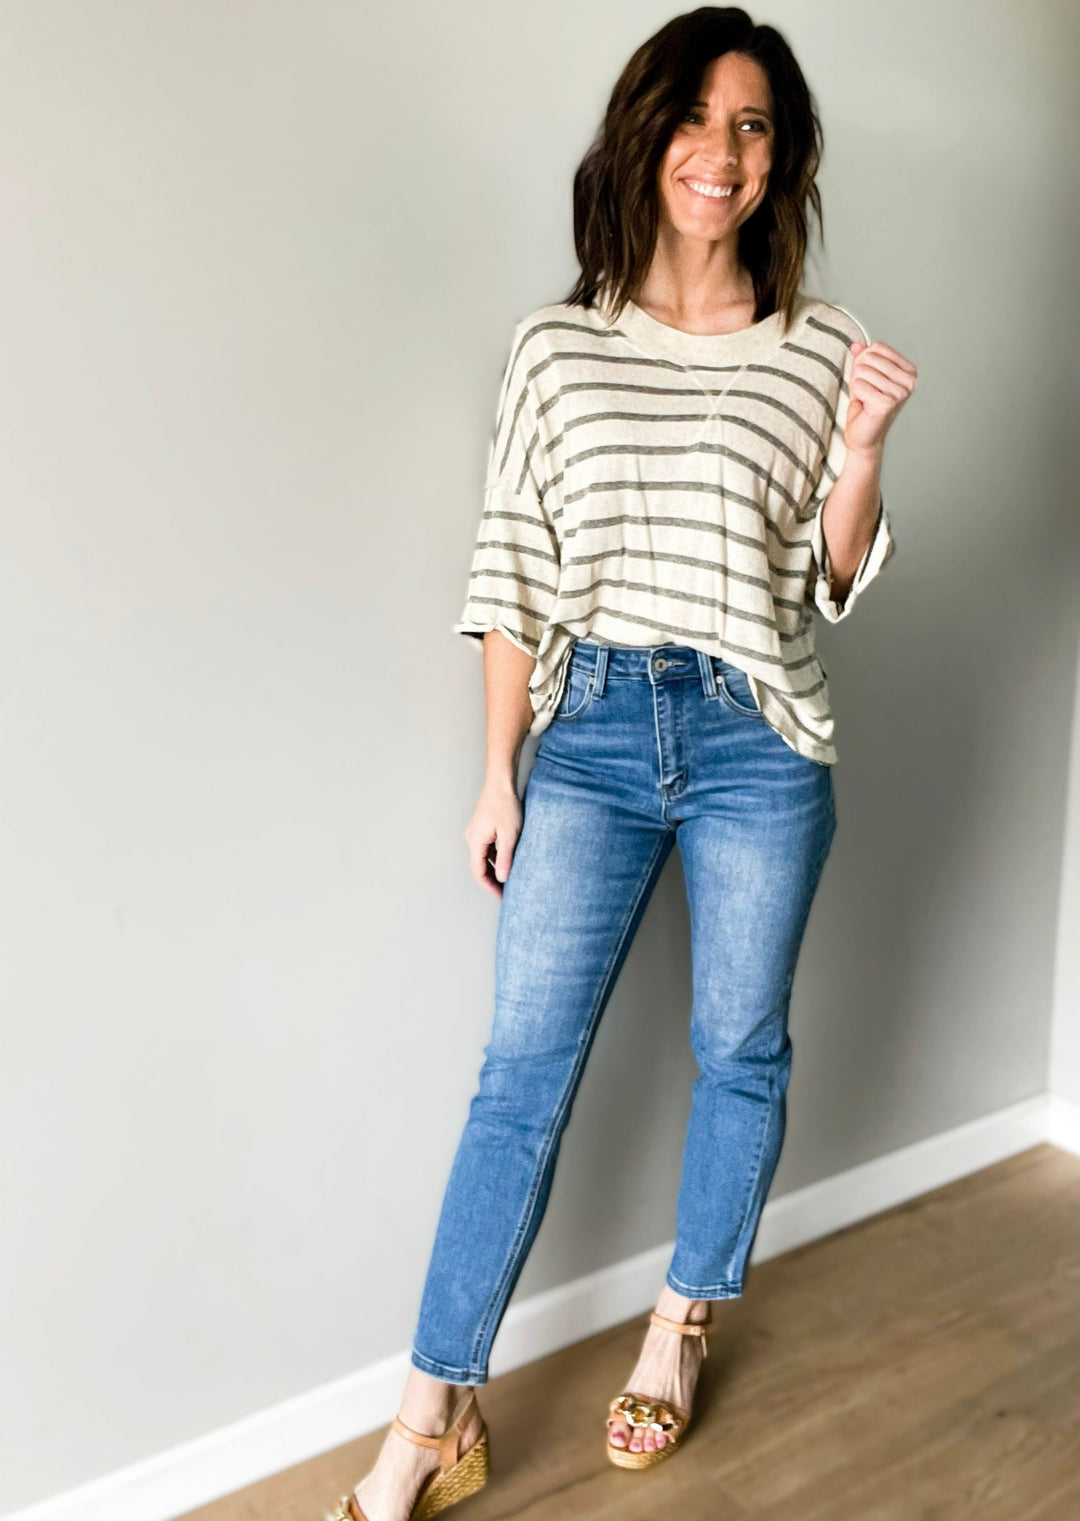 Women's KanCan Jeans at Embolden Boutique in Central Illinois - High Rise Slim Straight Medium/Light Wash Jeans